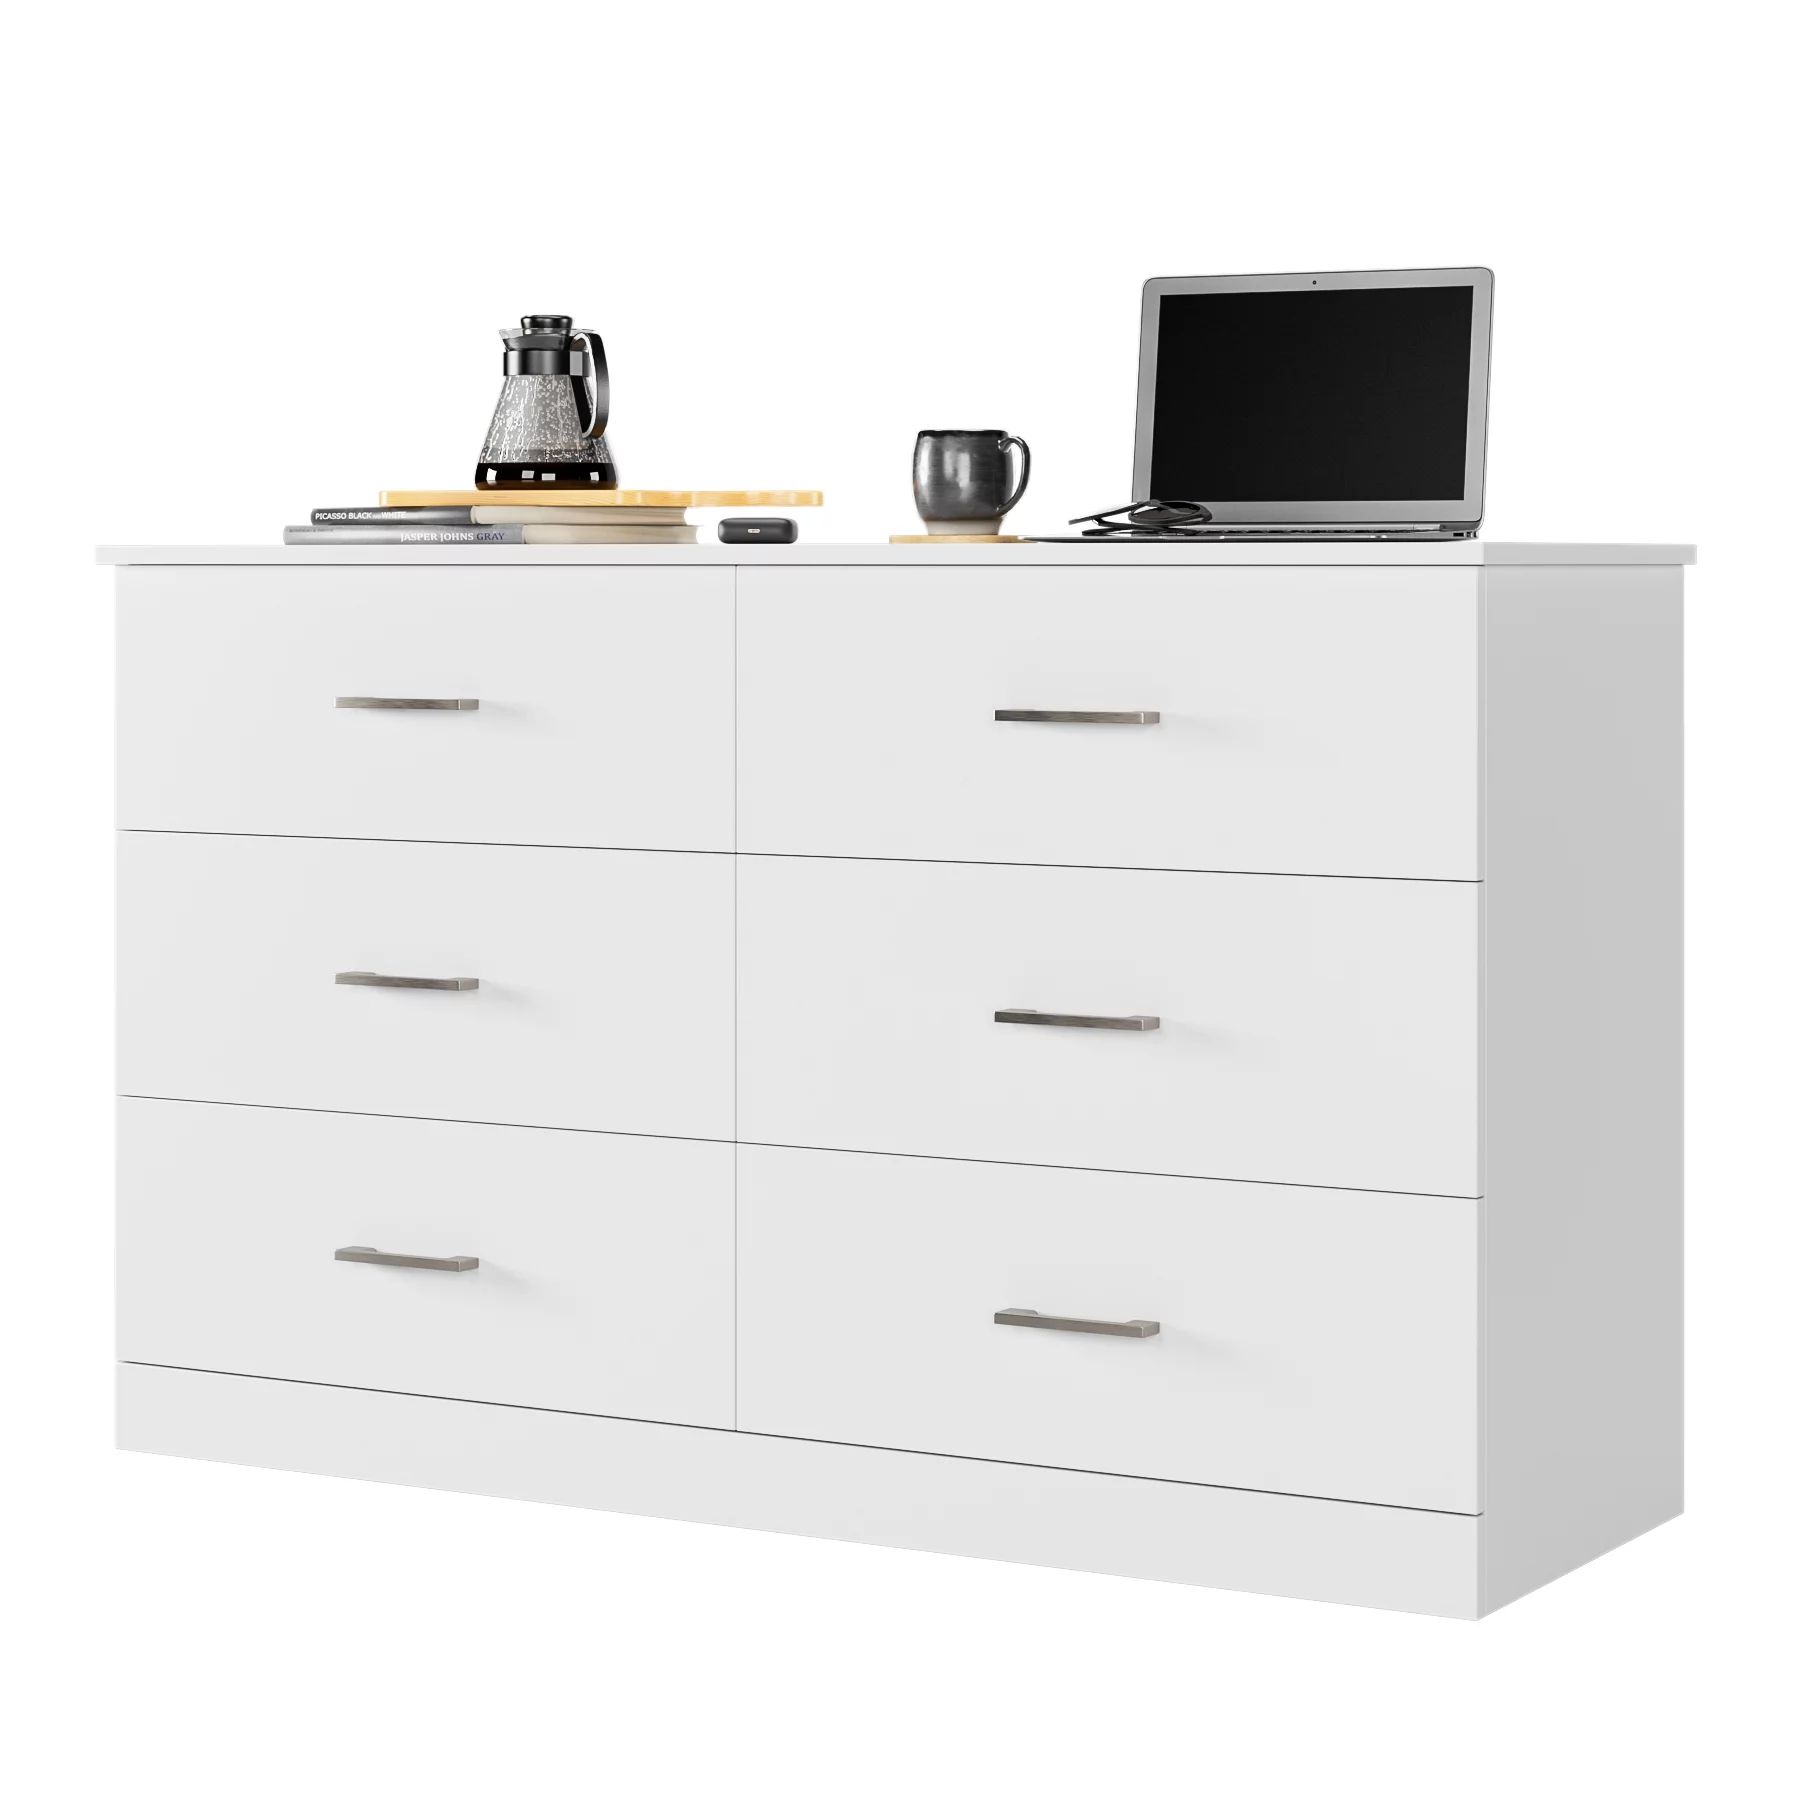 Homfa 6 Drawer White Double Dresser, Wood Storage Cabinet with Easy Pull Out Handles for Living R... | Walmart (US)